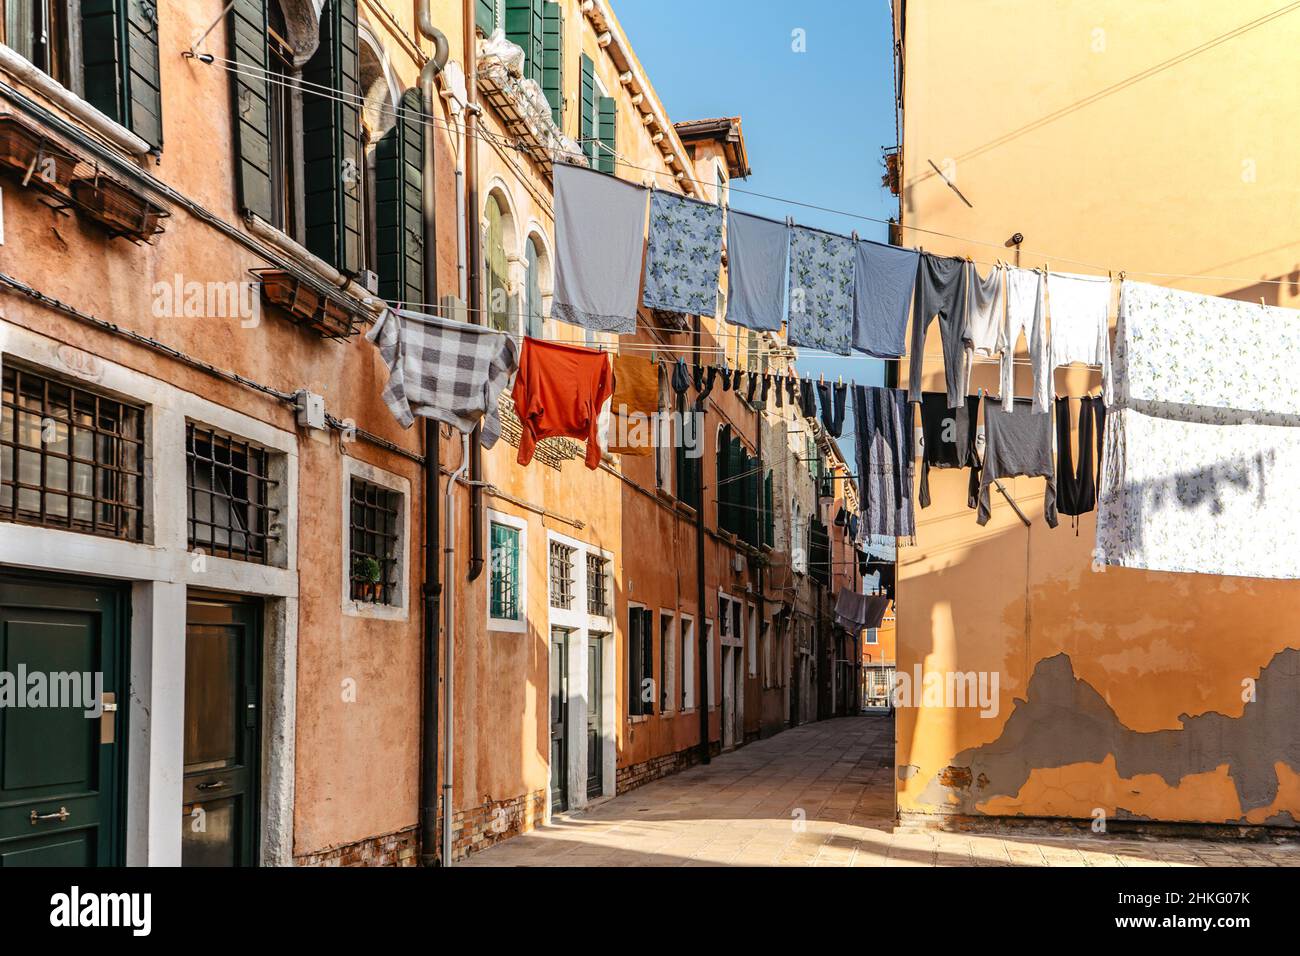 Laundry hanging out of typical Venetian facade,Italy.Narrow street with colorful buildings and clothes dry on rope,Venice.Clean clothes drying outdoor Stock Photo